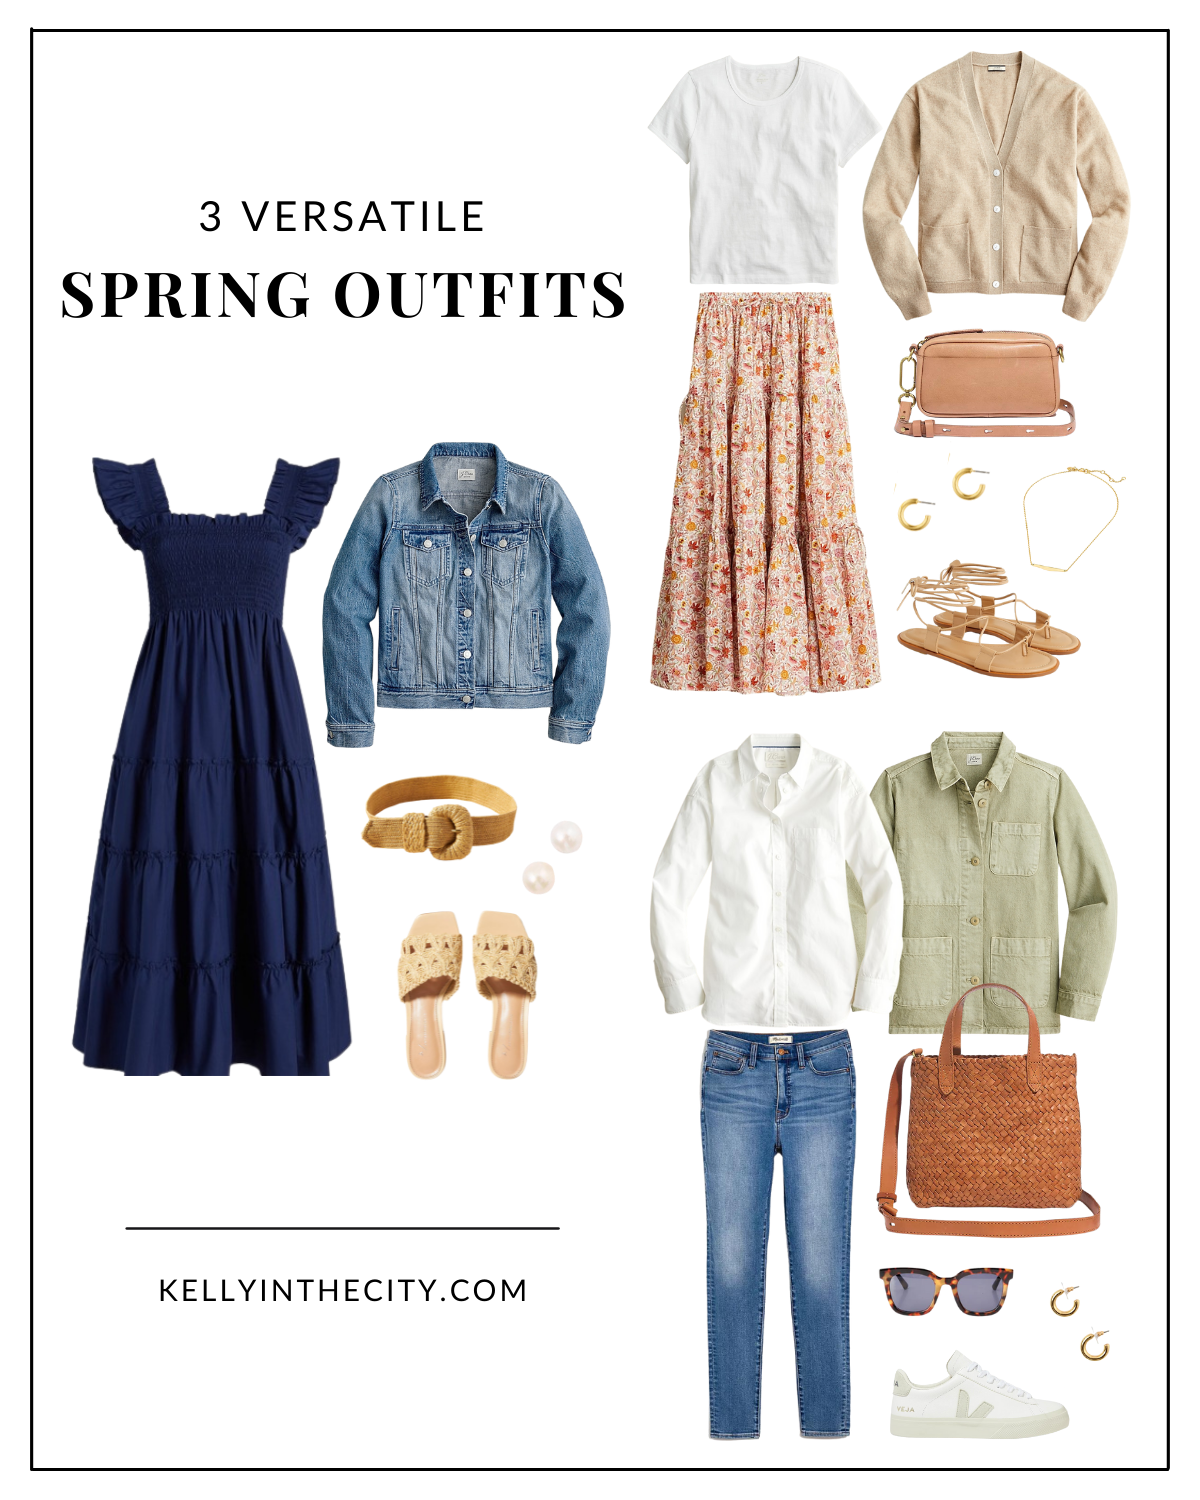 Versatile Spring Outfits